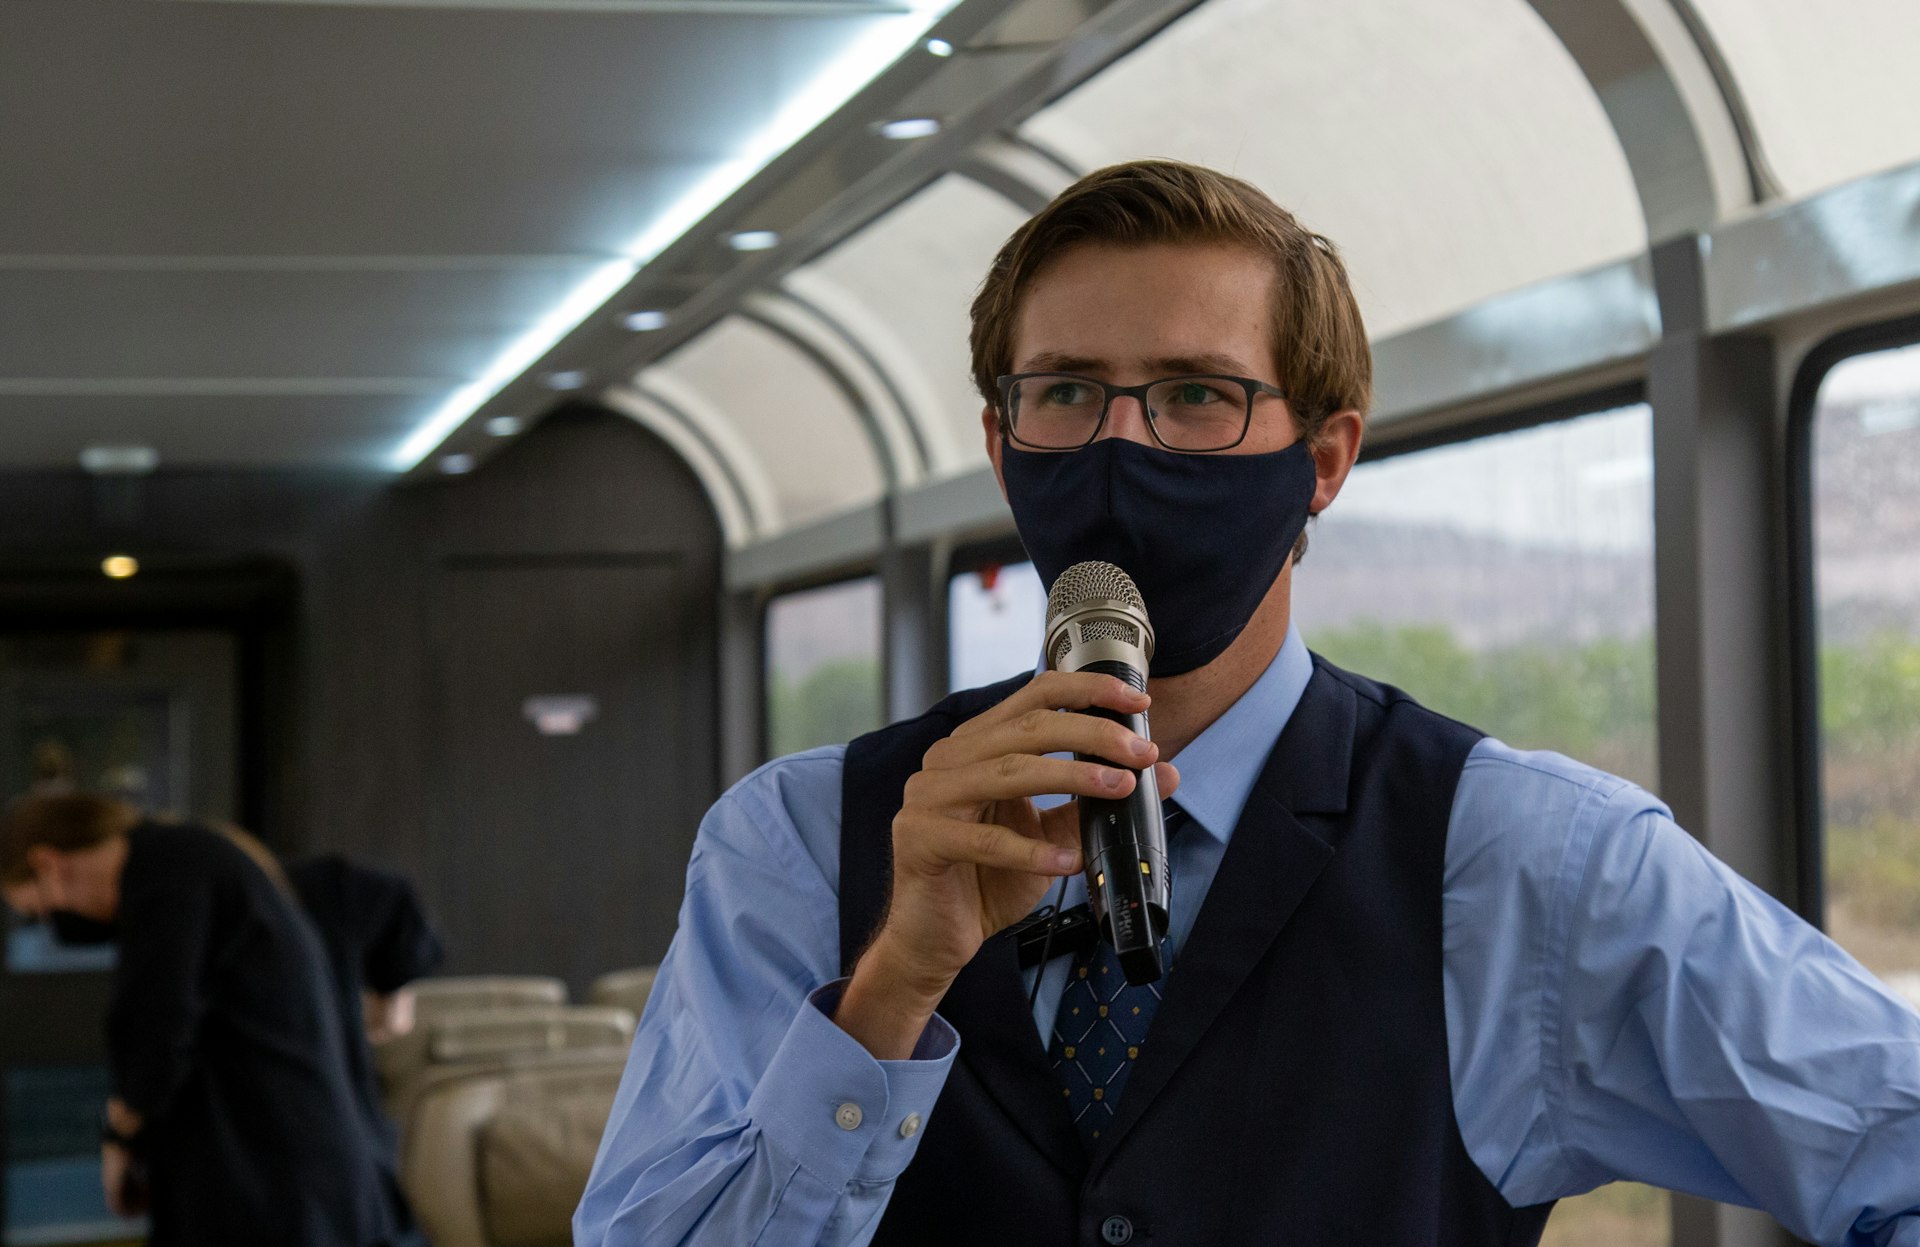 A man in a facemask holding a microphone